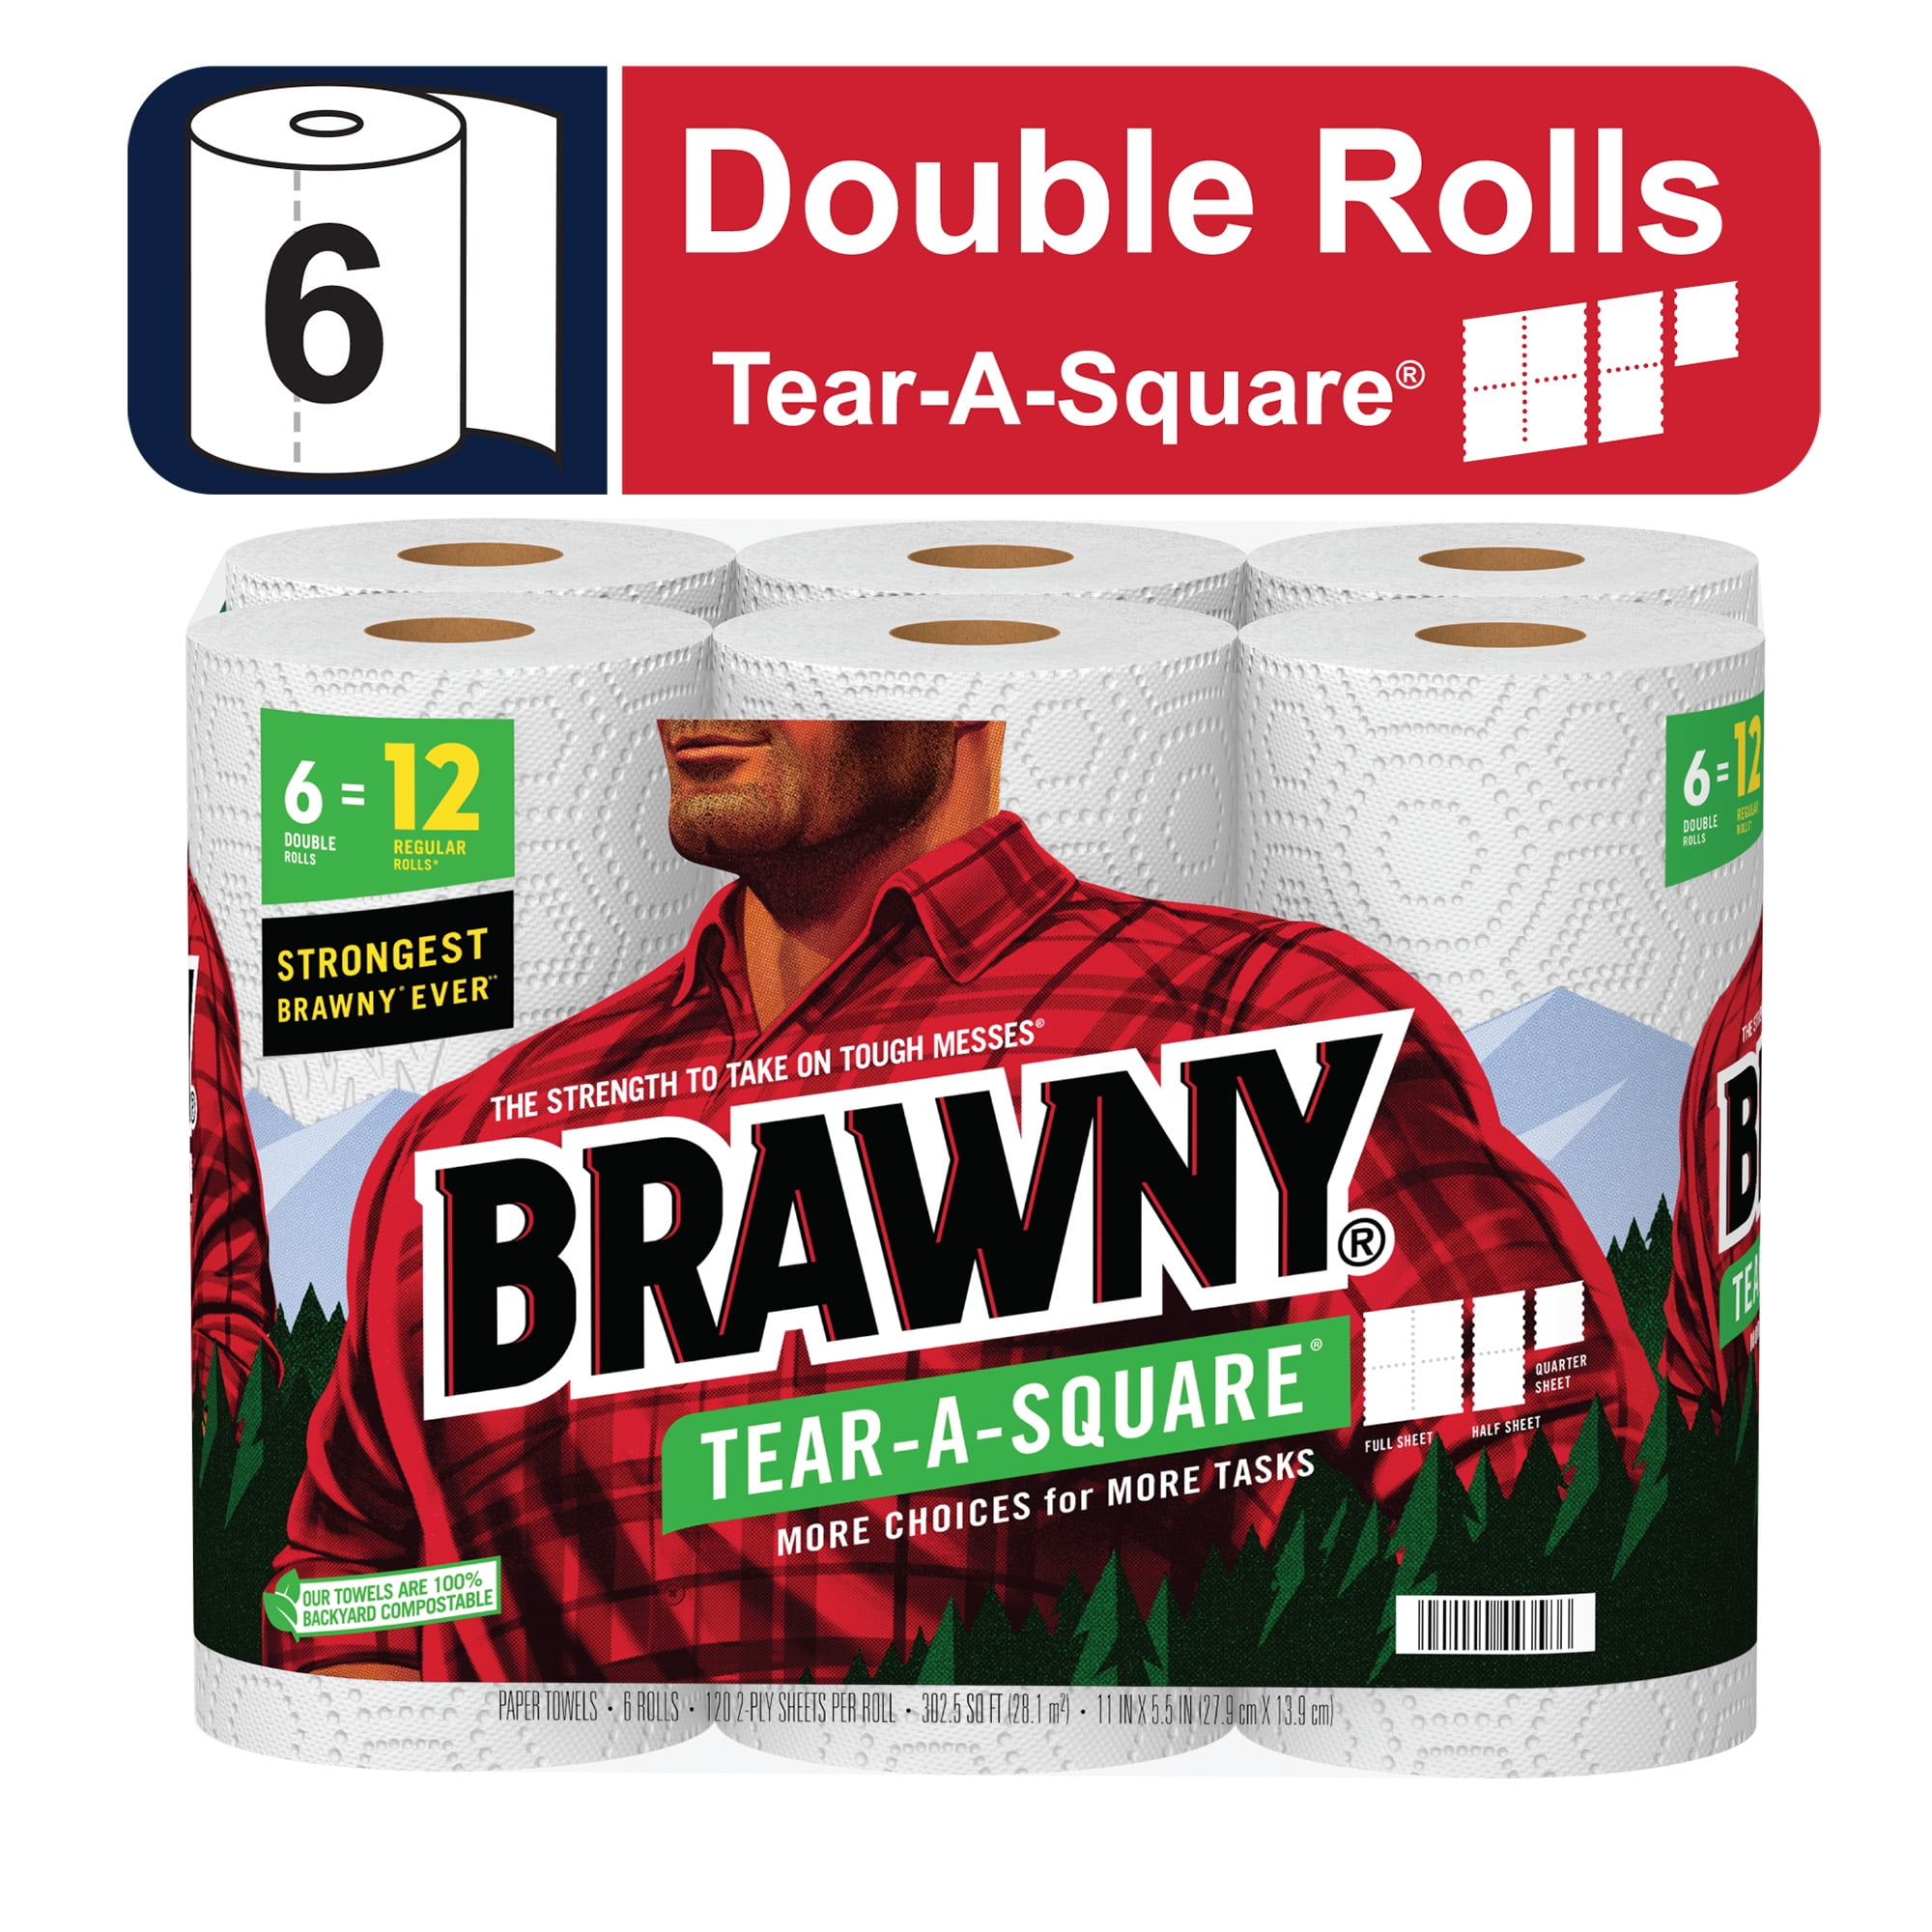 Brawny Tear-A-Square Paper Towels, Double Rolls, 2-Ply - 6 rolls